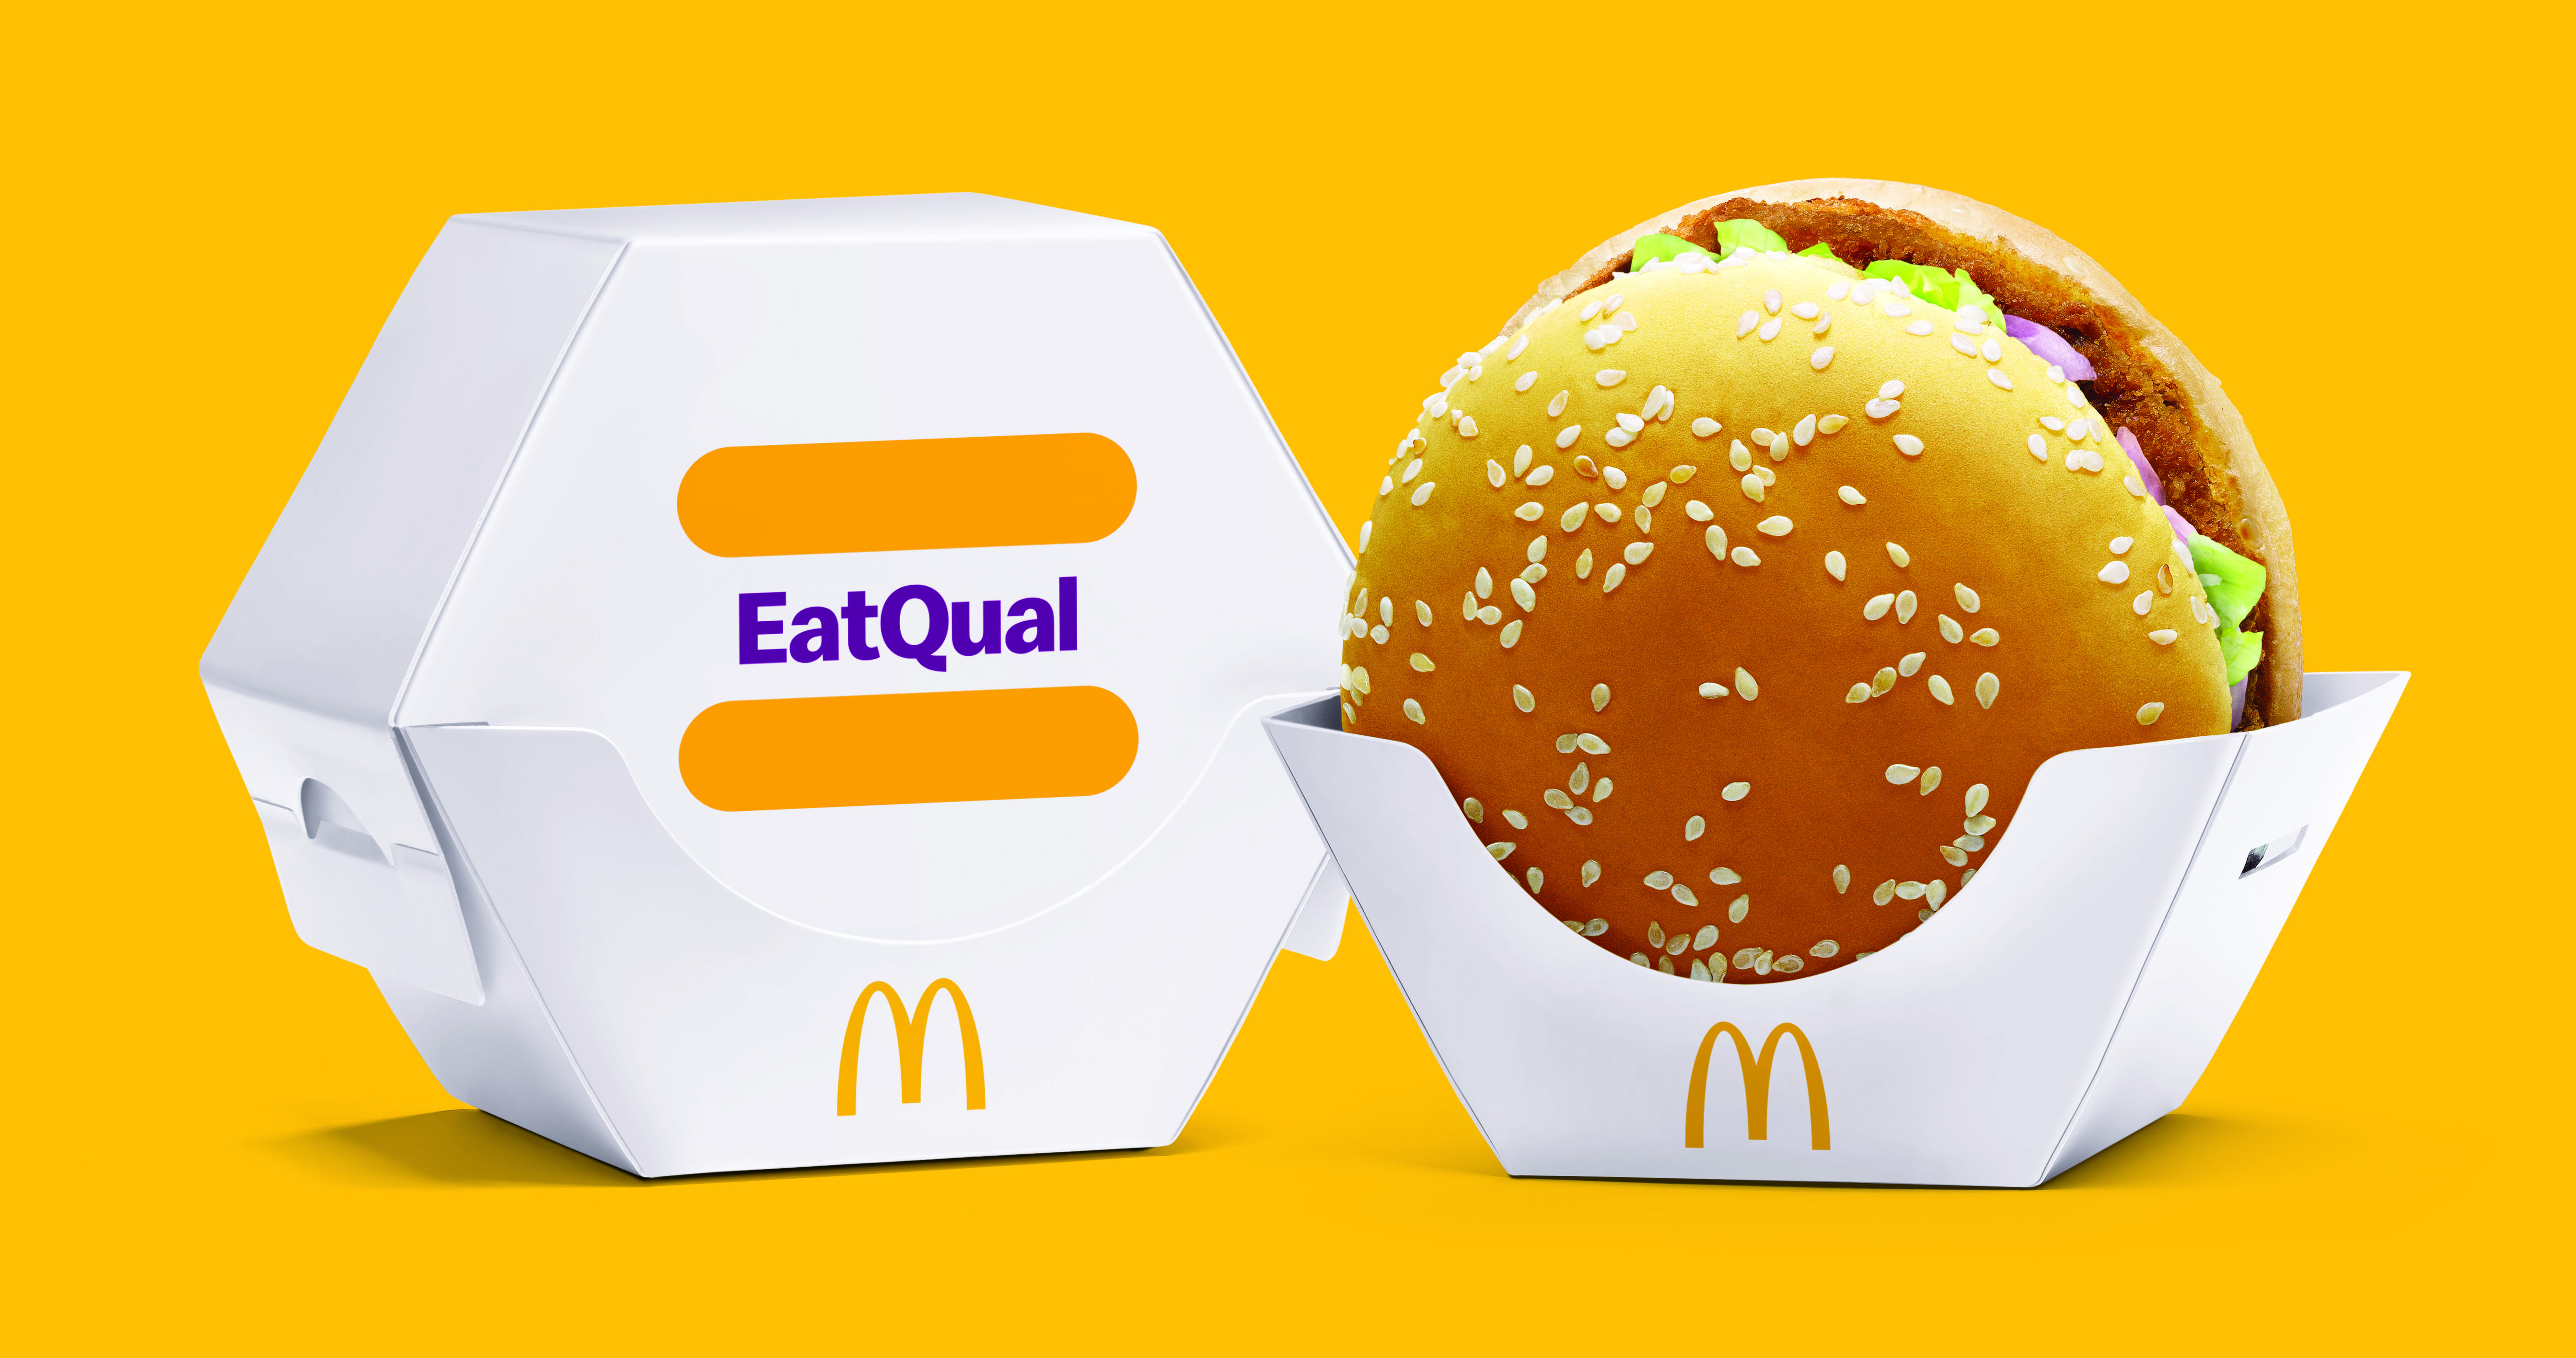 McDonald’s India reinforces its commitment to the EatQual platform aimed at fostering inclusion